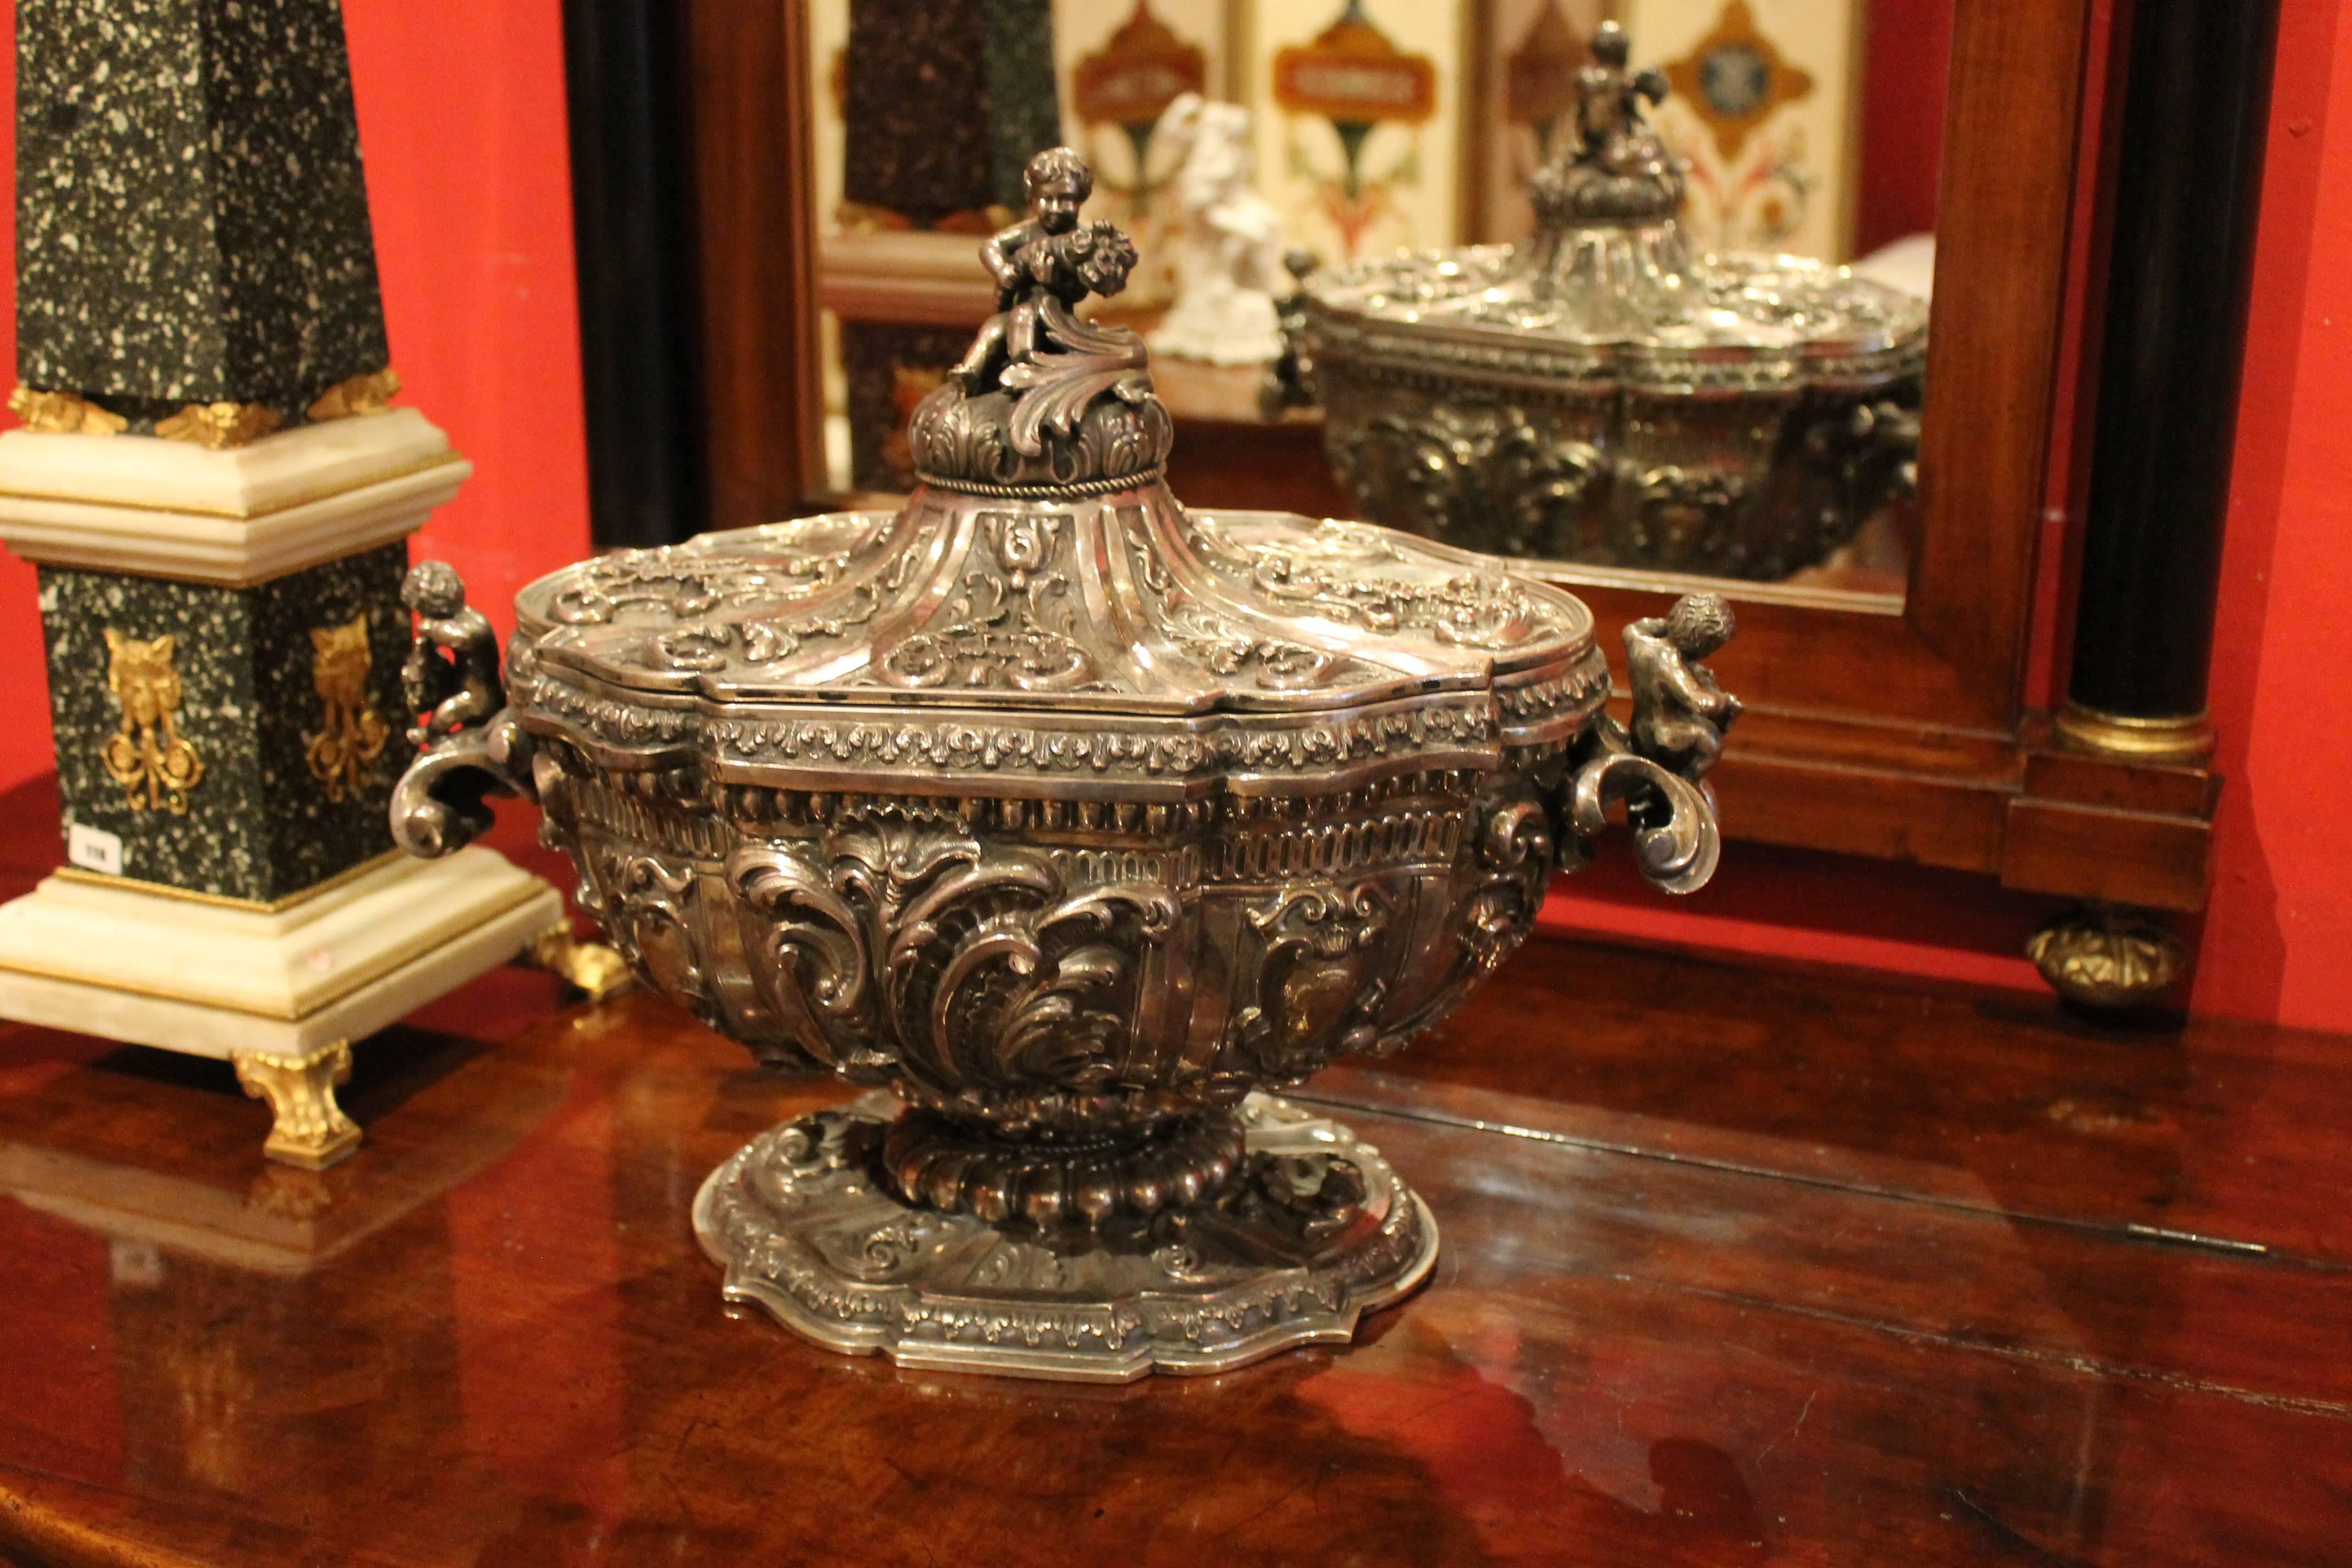 An exceedingly rare Roman silver bowl centrepiece richly chiseled and finely high relief embossed in the round. This silver tureen is a rich and one-of-a-kind work of art that displays the graceful and lavish Baroque details with intricate